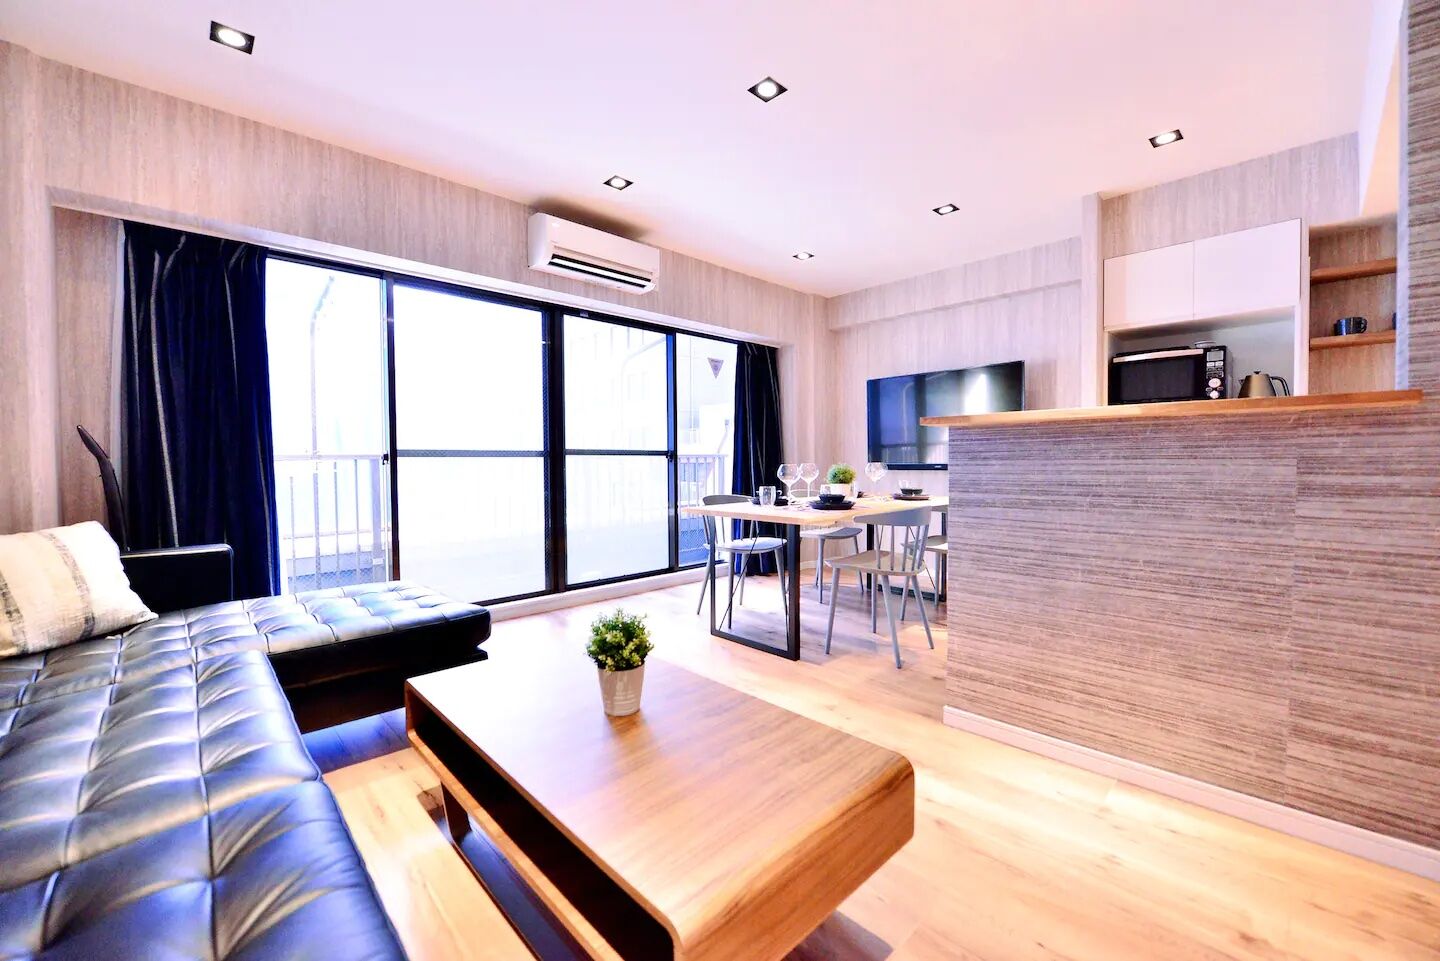 12 Tokyo Airbnbs That Put You in the Heart of This Incredible City